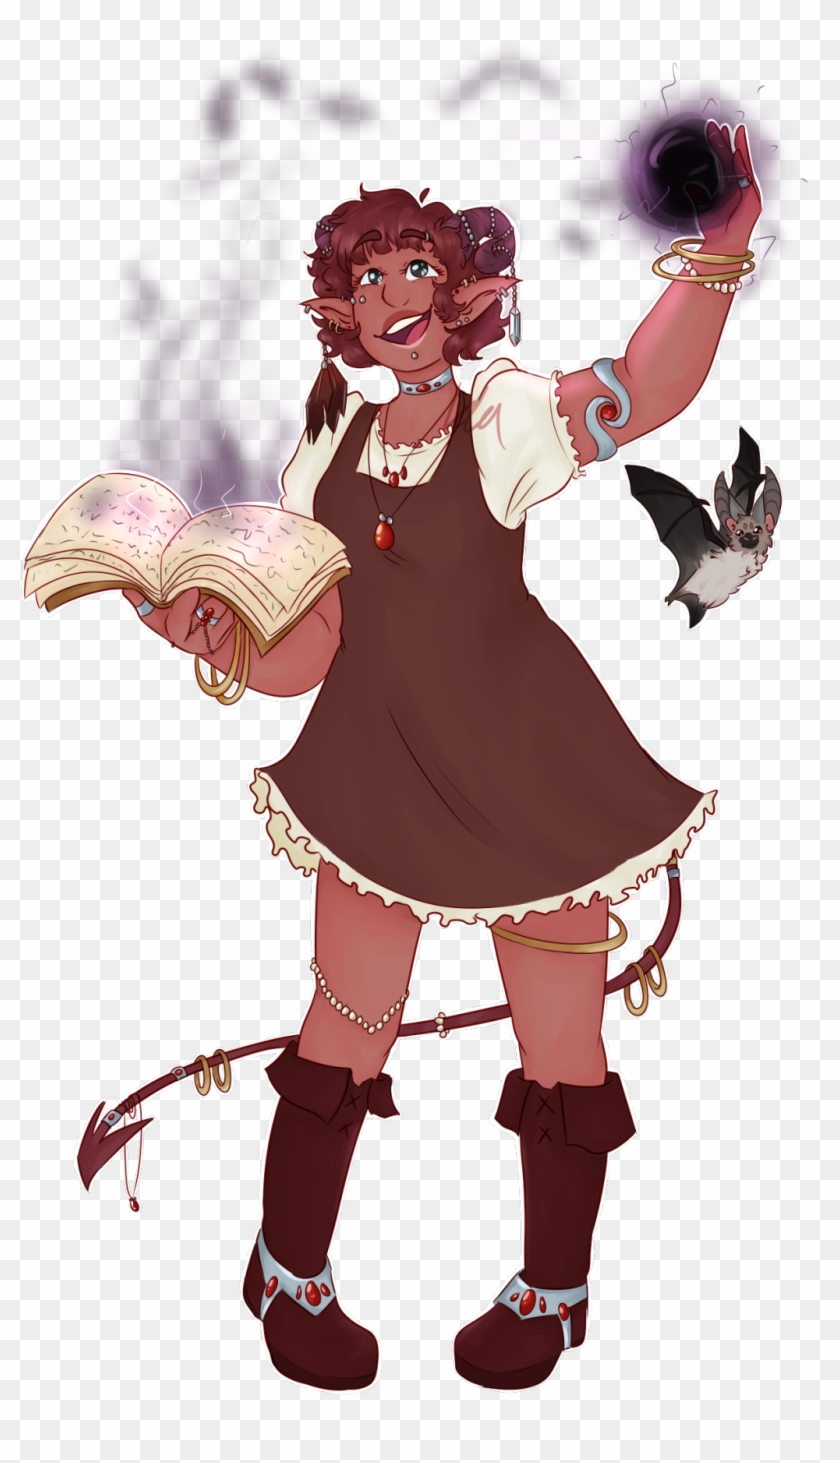 Oc Adorable Tiefling Necromancer And Her Tiefling Kid Hd Png Download 1280x1792 Pngfind